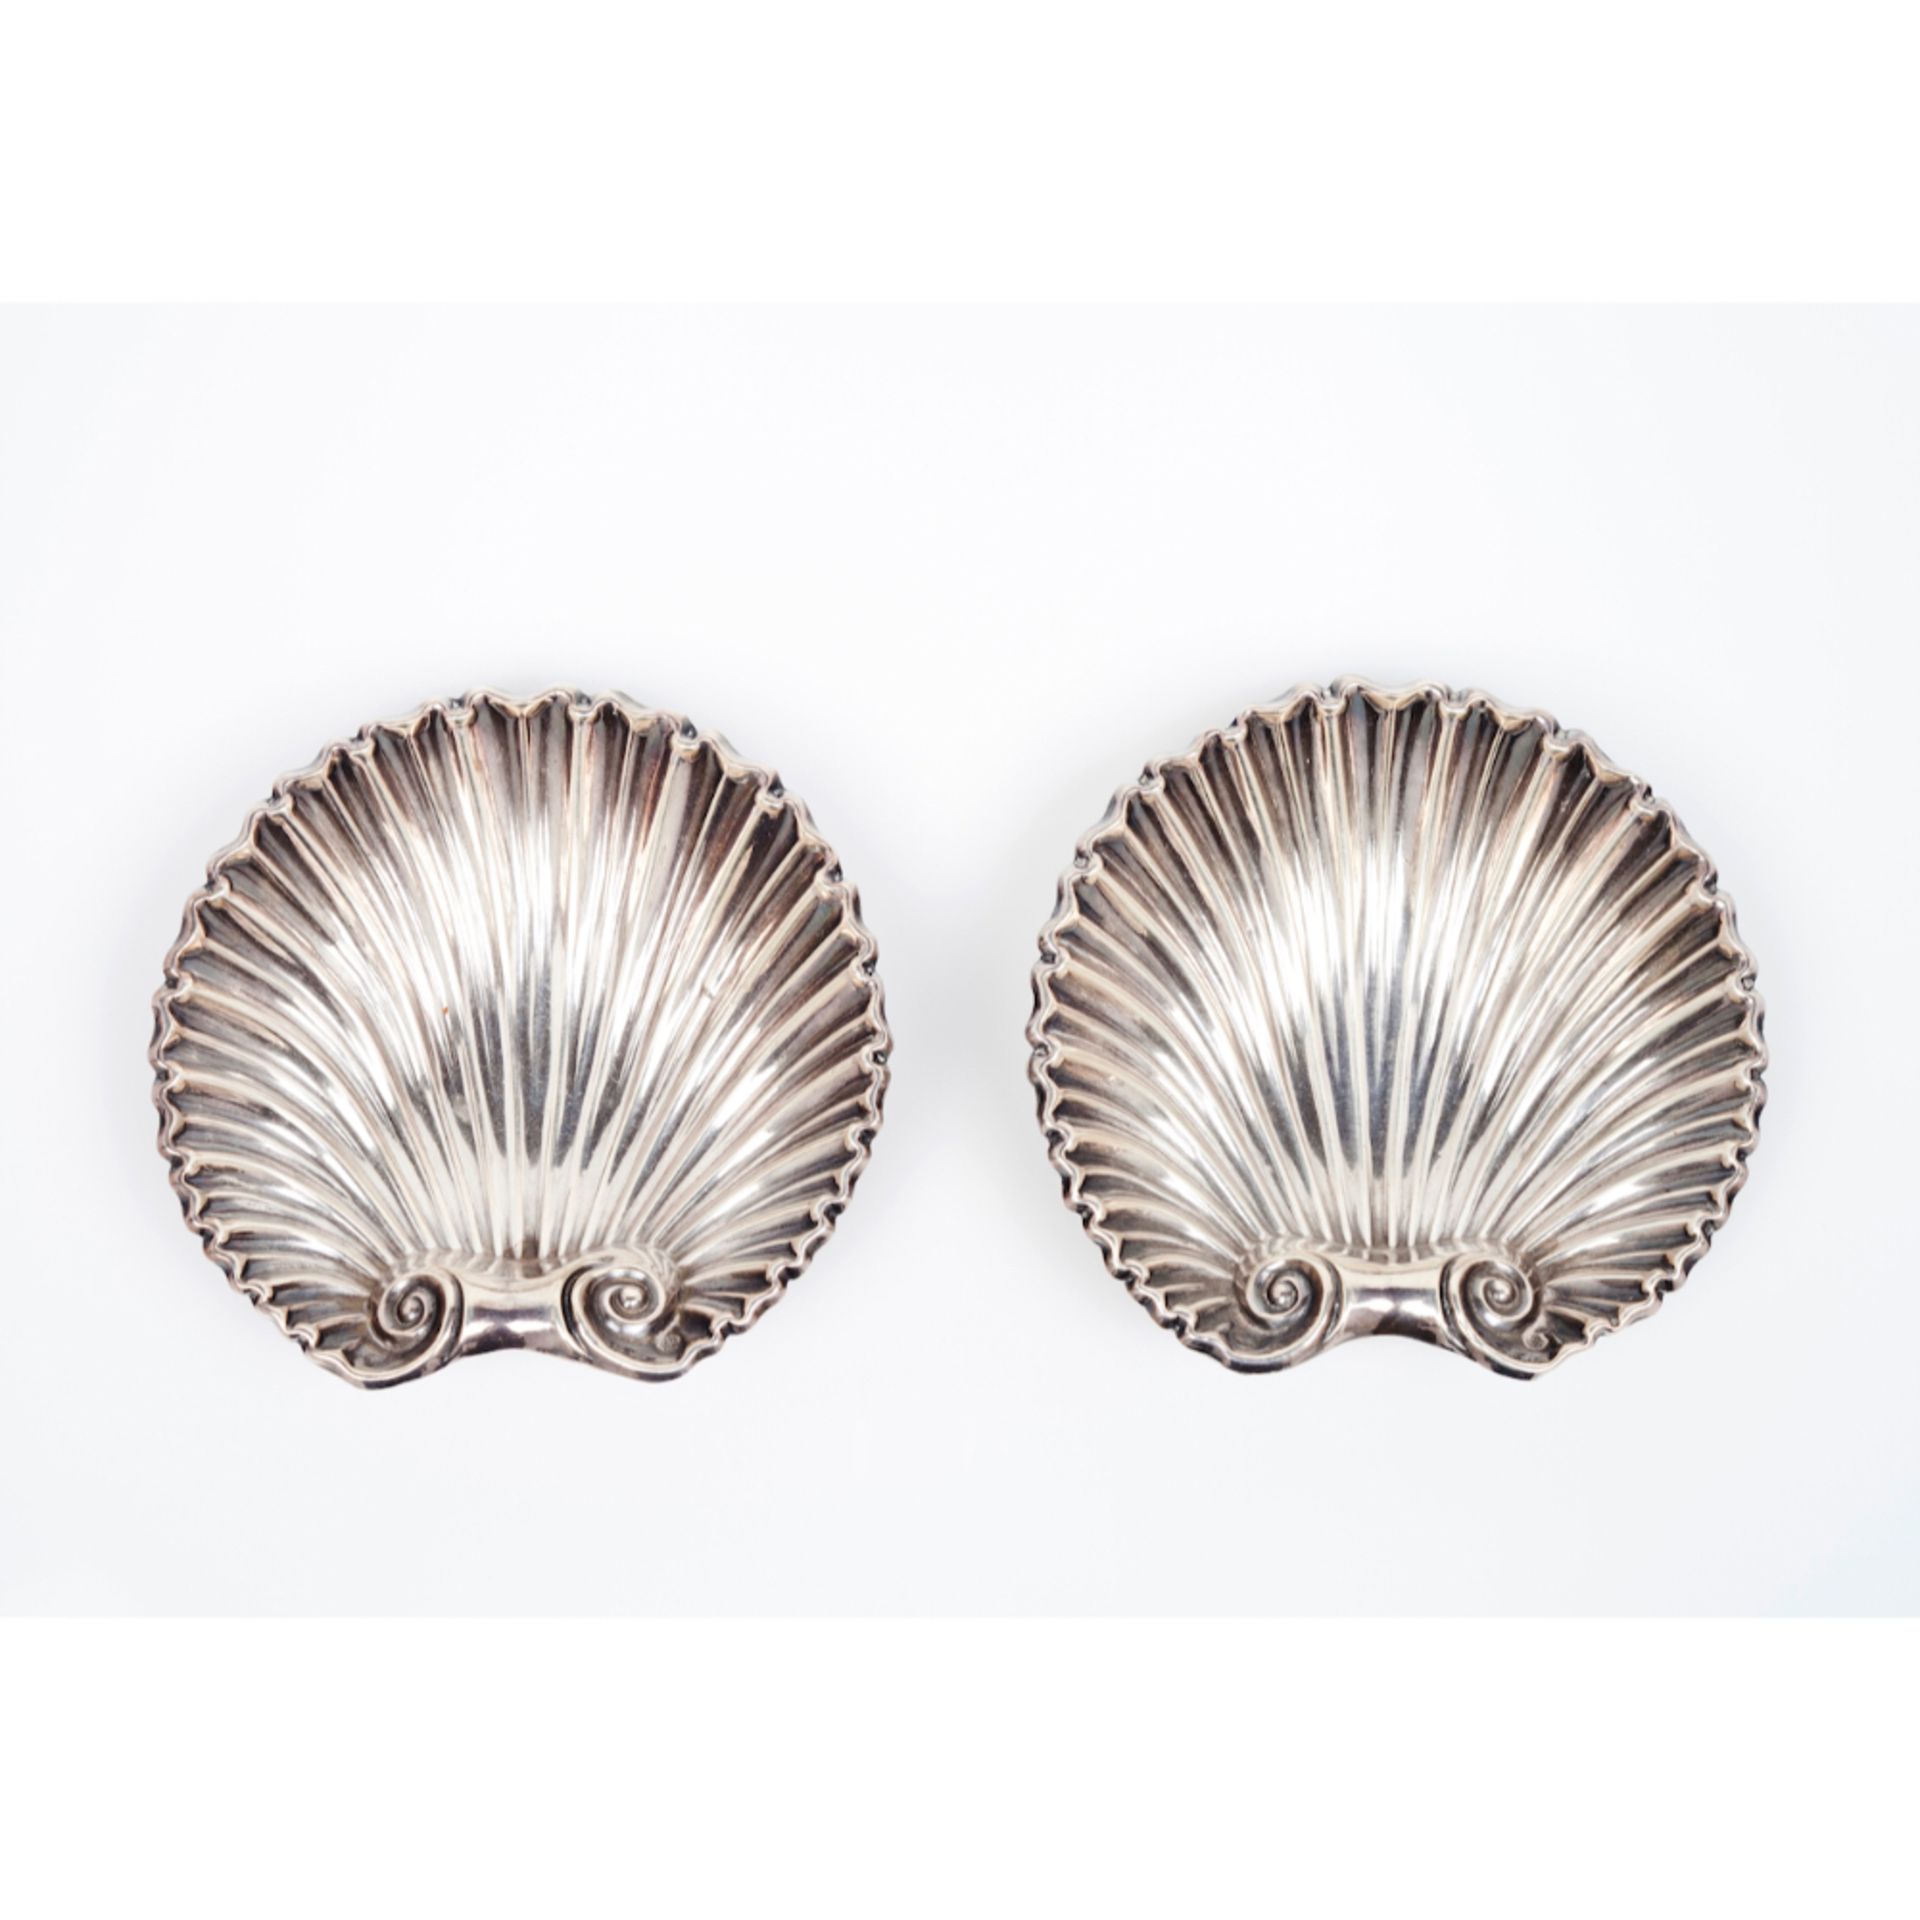 A pair of shell shaped small containersSpanish silver Engraved and repousse silver Spanish assay